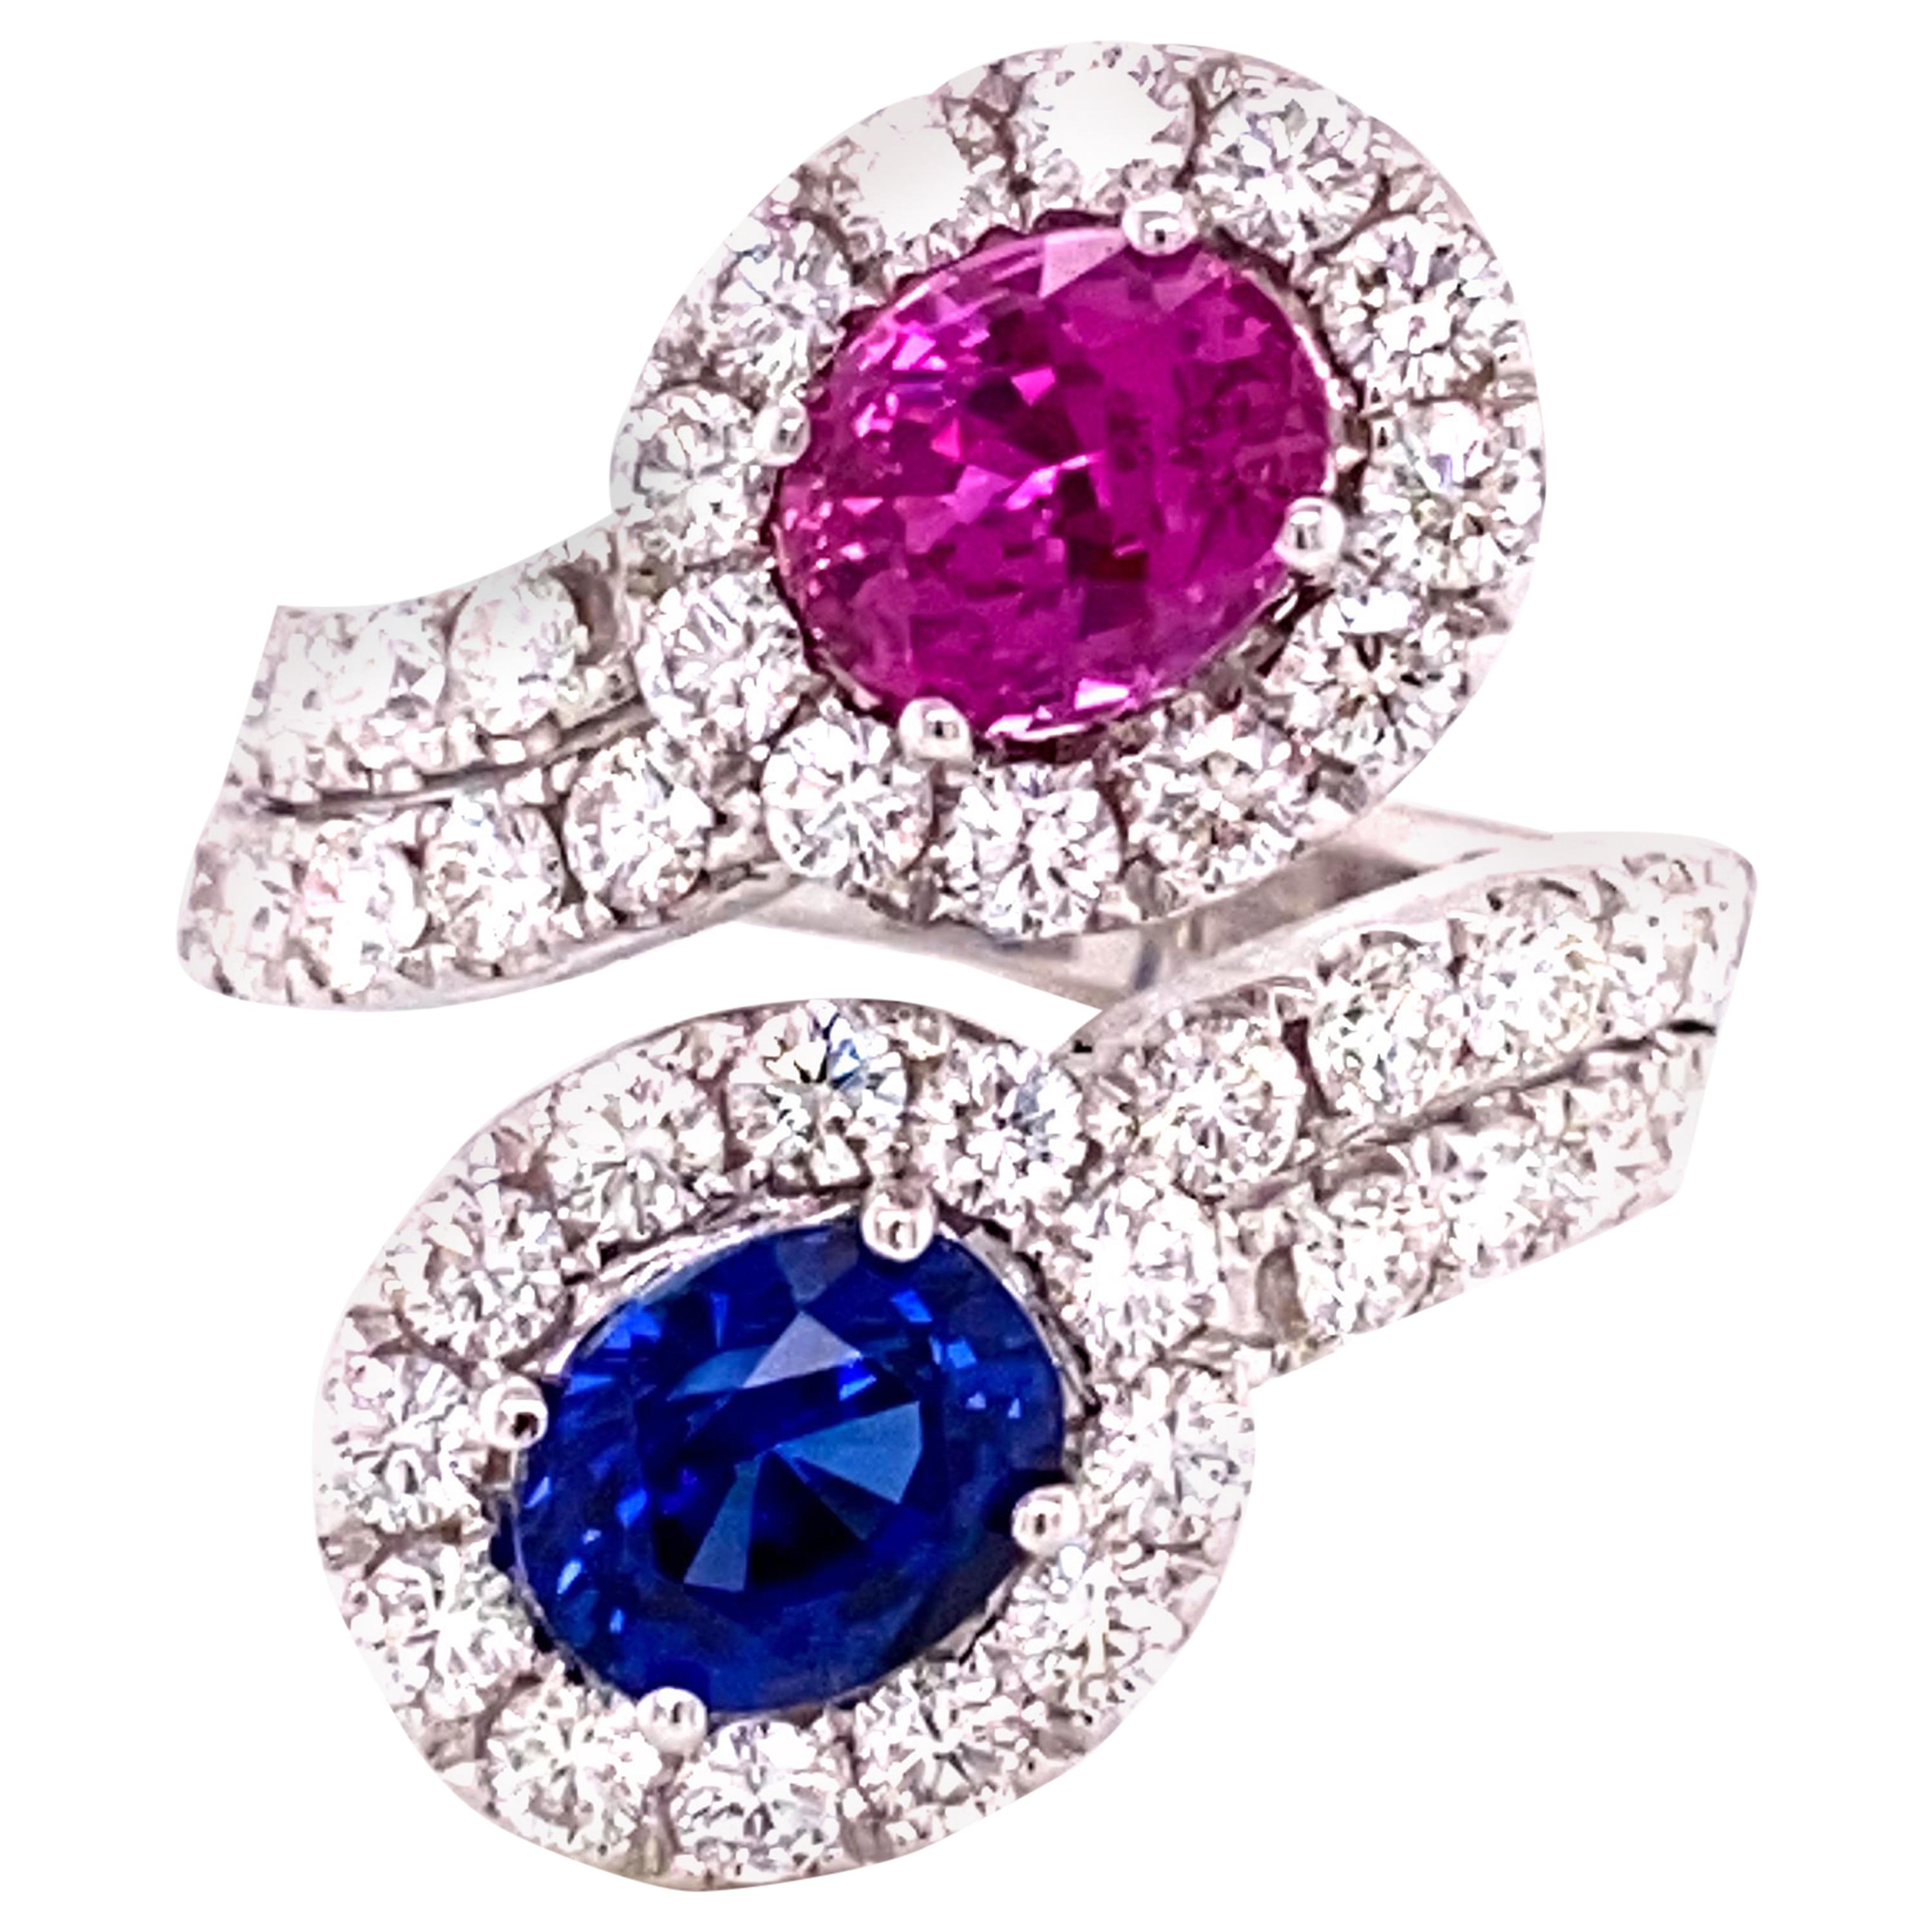 GRS Certified 1.59 Carat Blue Sapphire and 1.54 Carat Pink Sapphire Diamond Ring For Sale